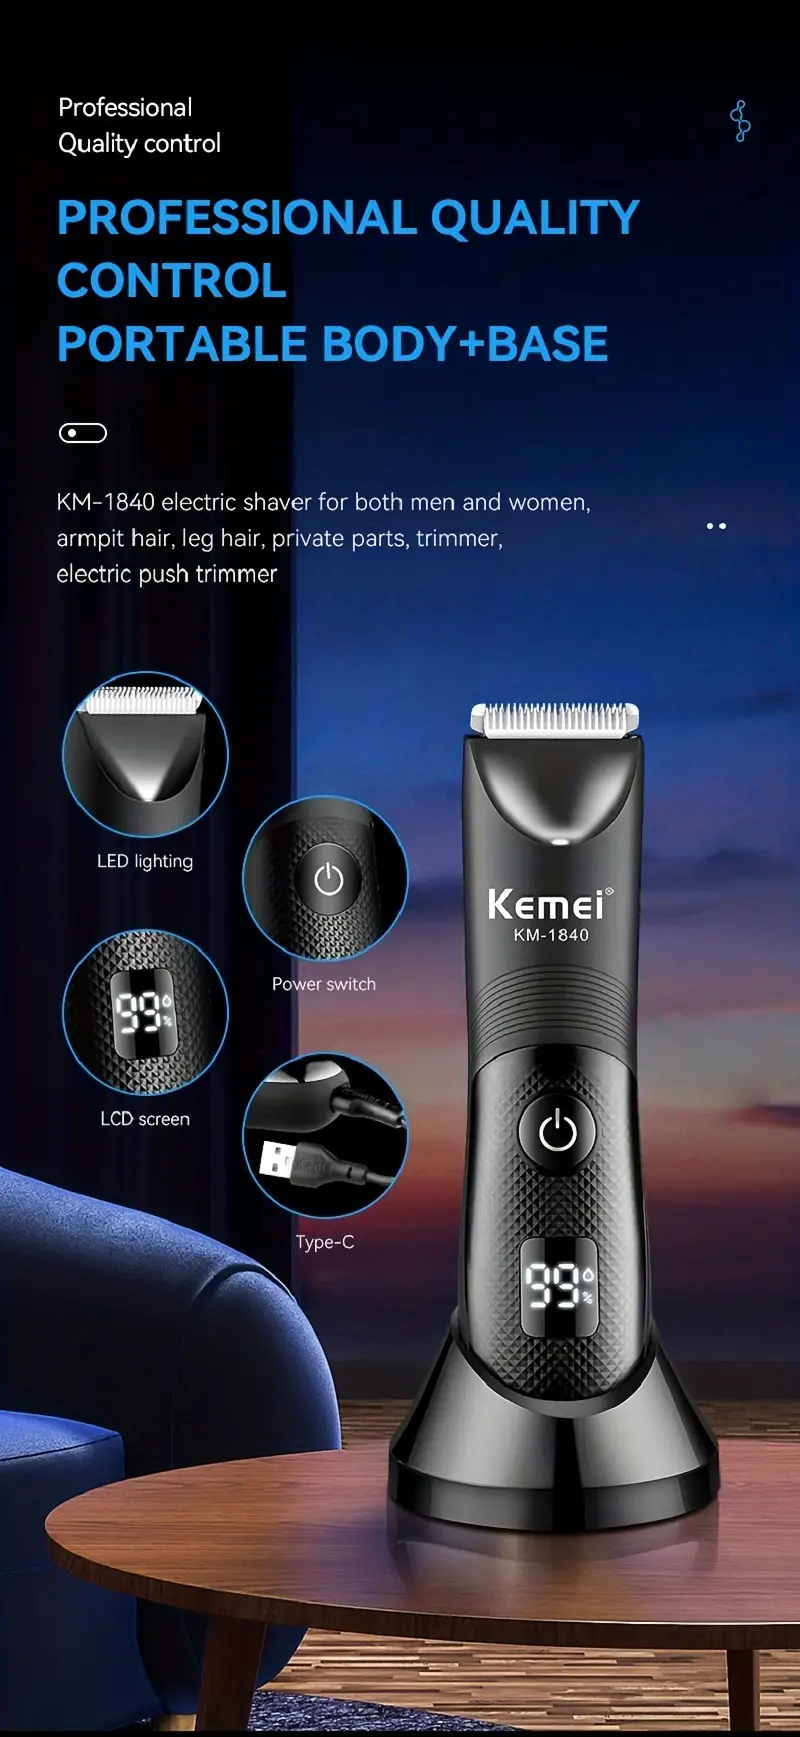 kemei body groin hair trimmer for men replaceable ceramic blade heads waterproof wet dry clippers led light and standing dock ultimate male hygiene razor and electric body shavers for balls details 3